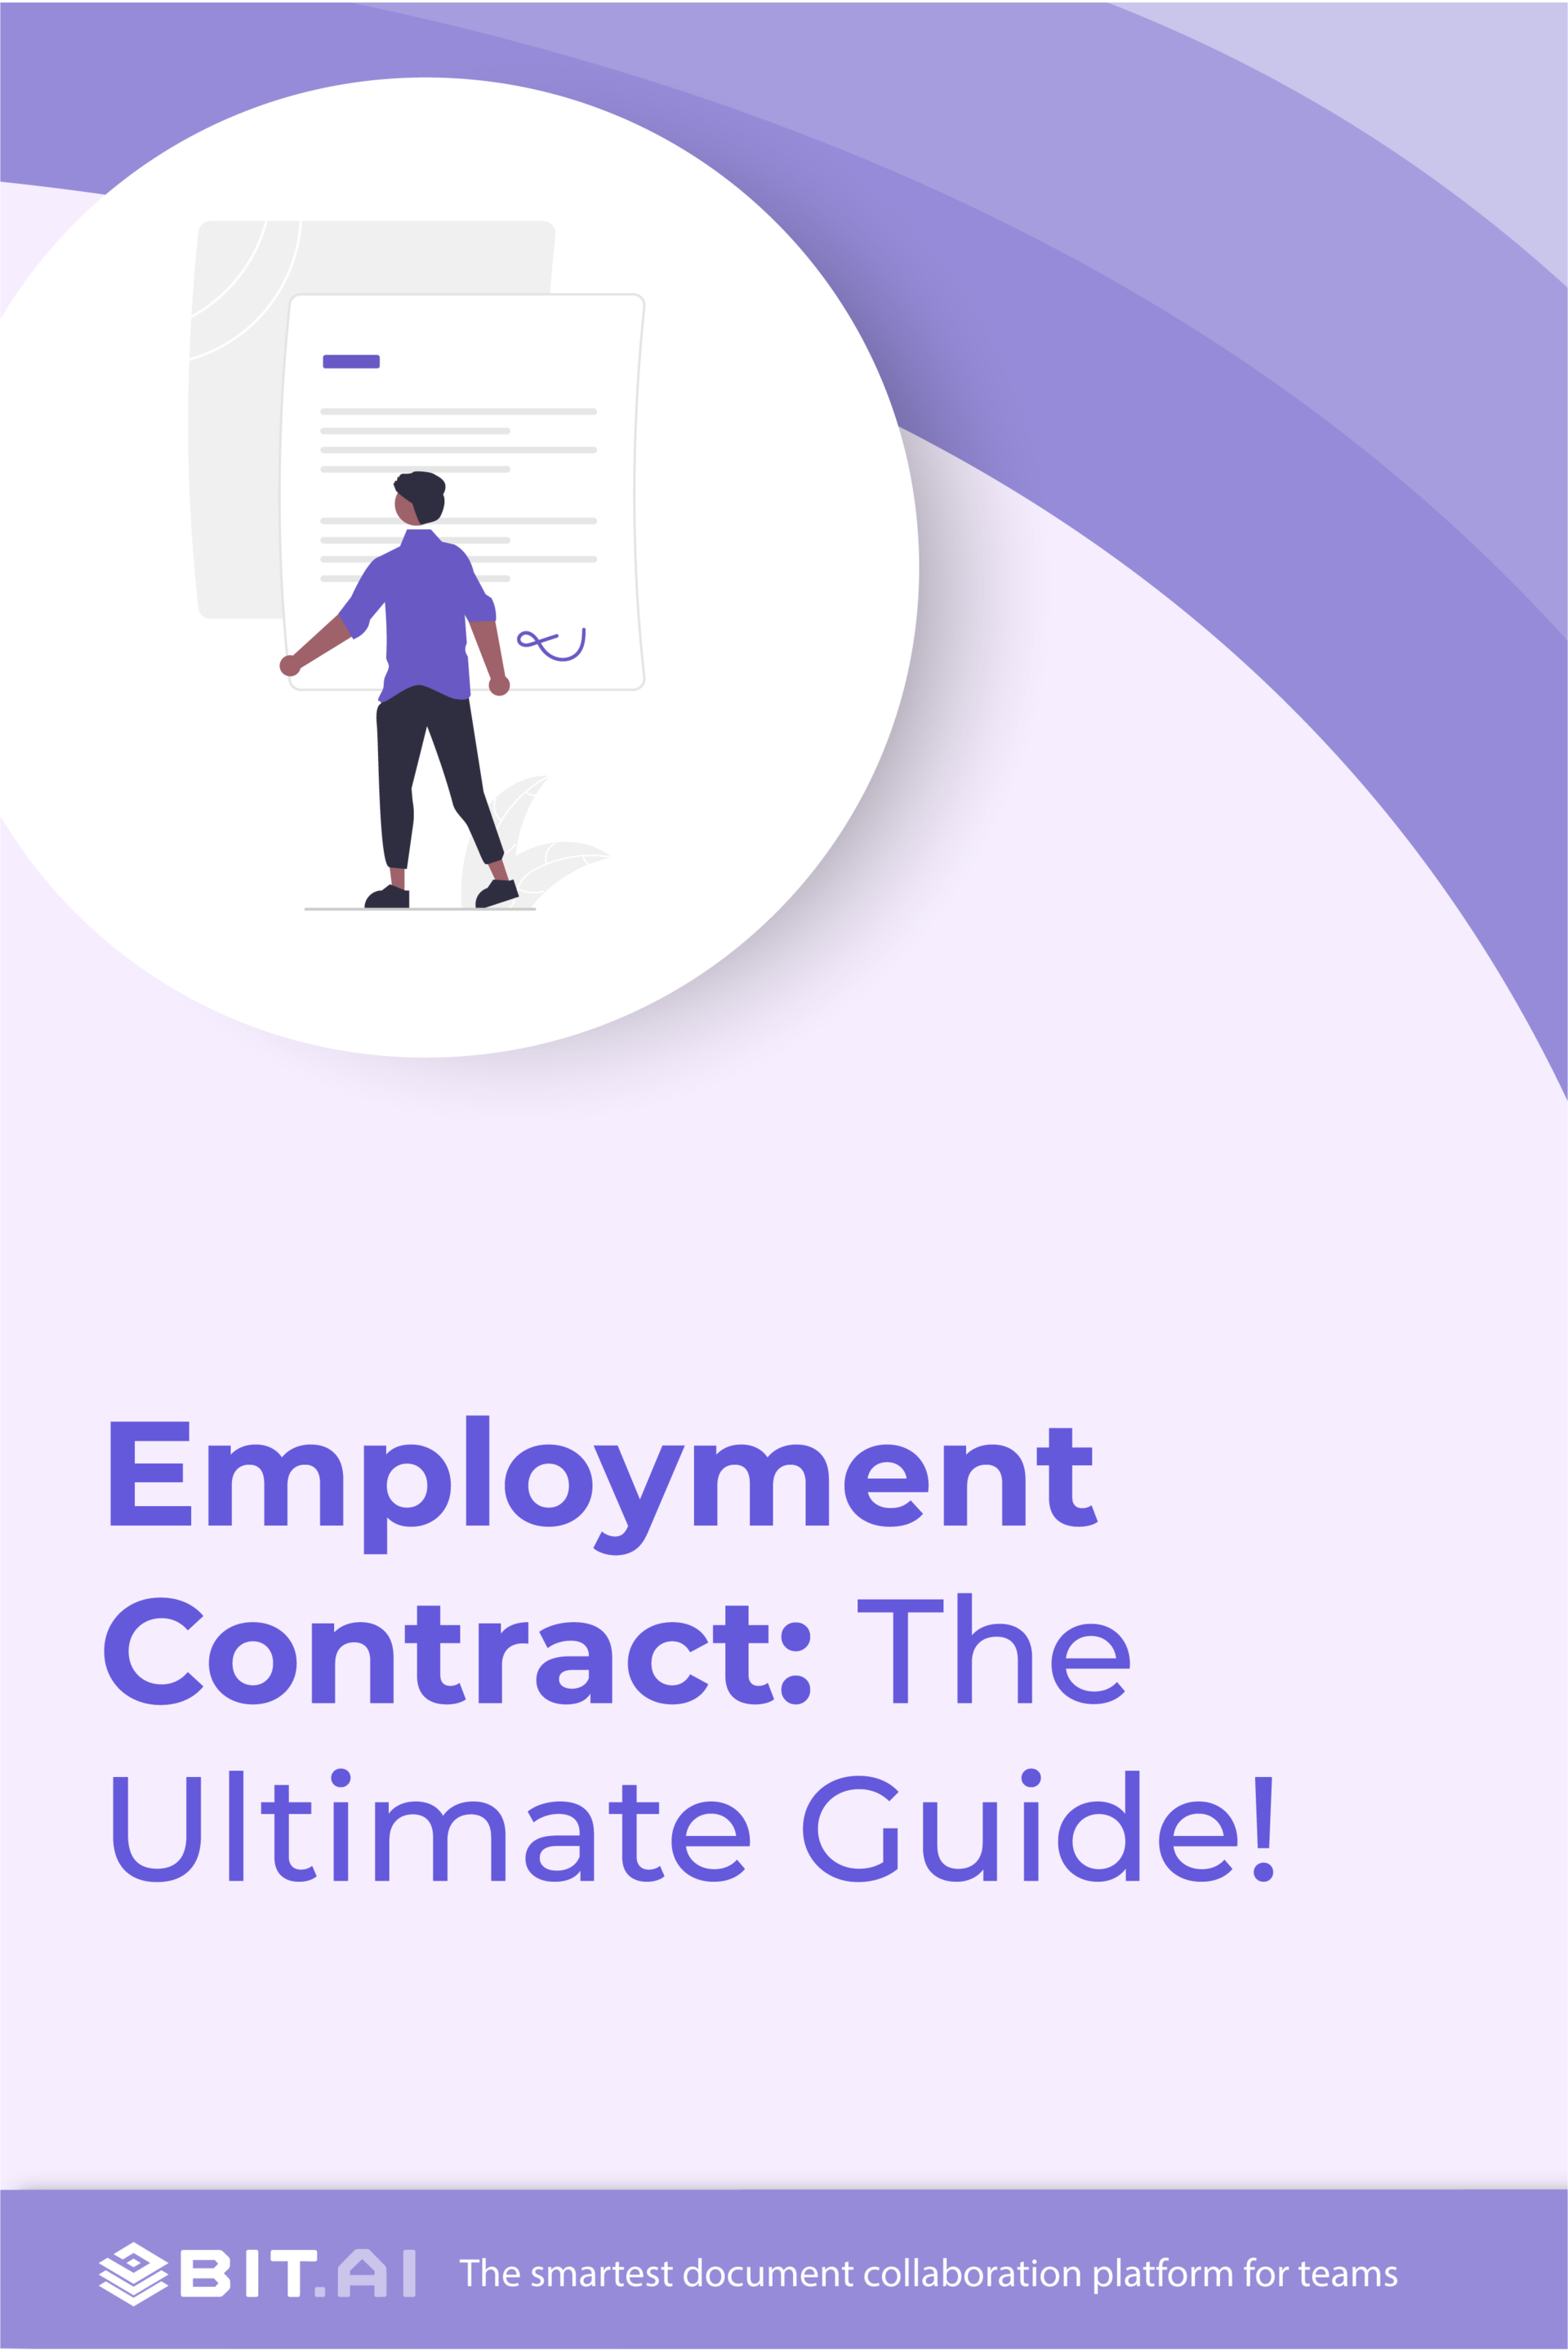 Types of emplyment contracts pinterest banner